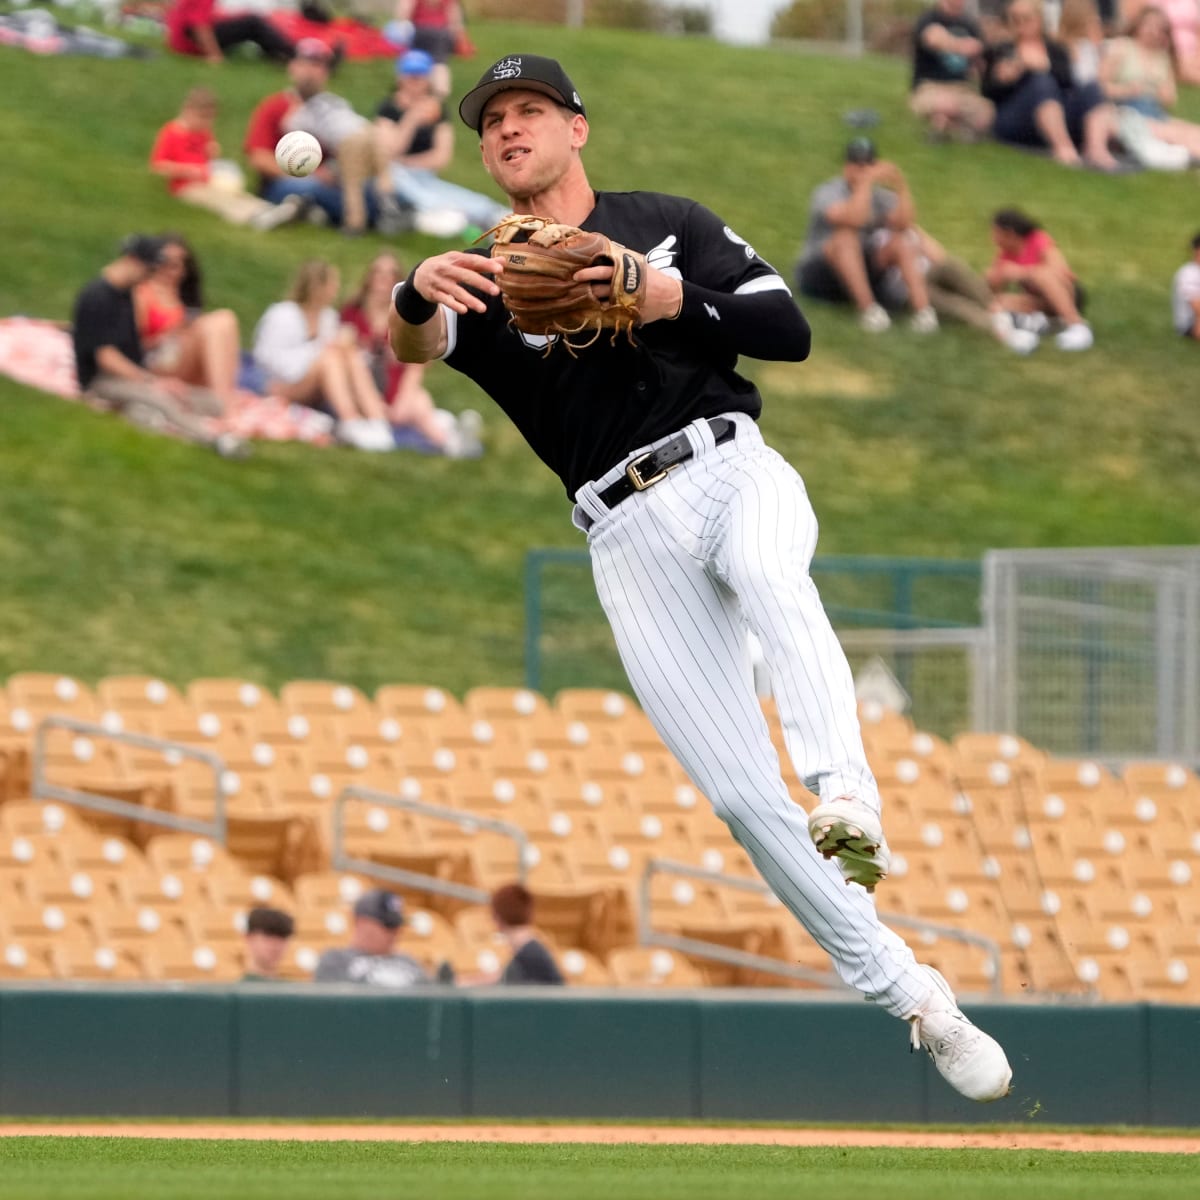 Zach Remillard taking advantage of opportunities with White Sox